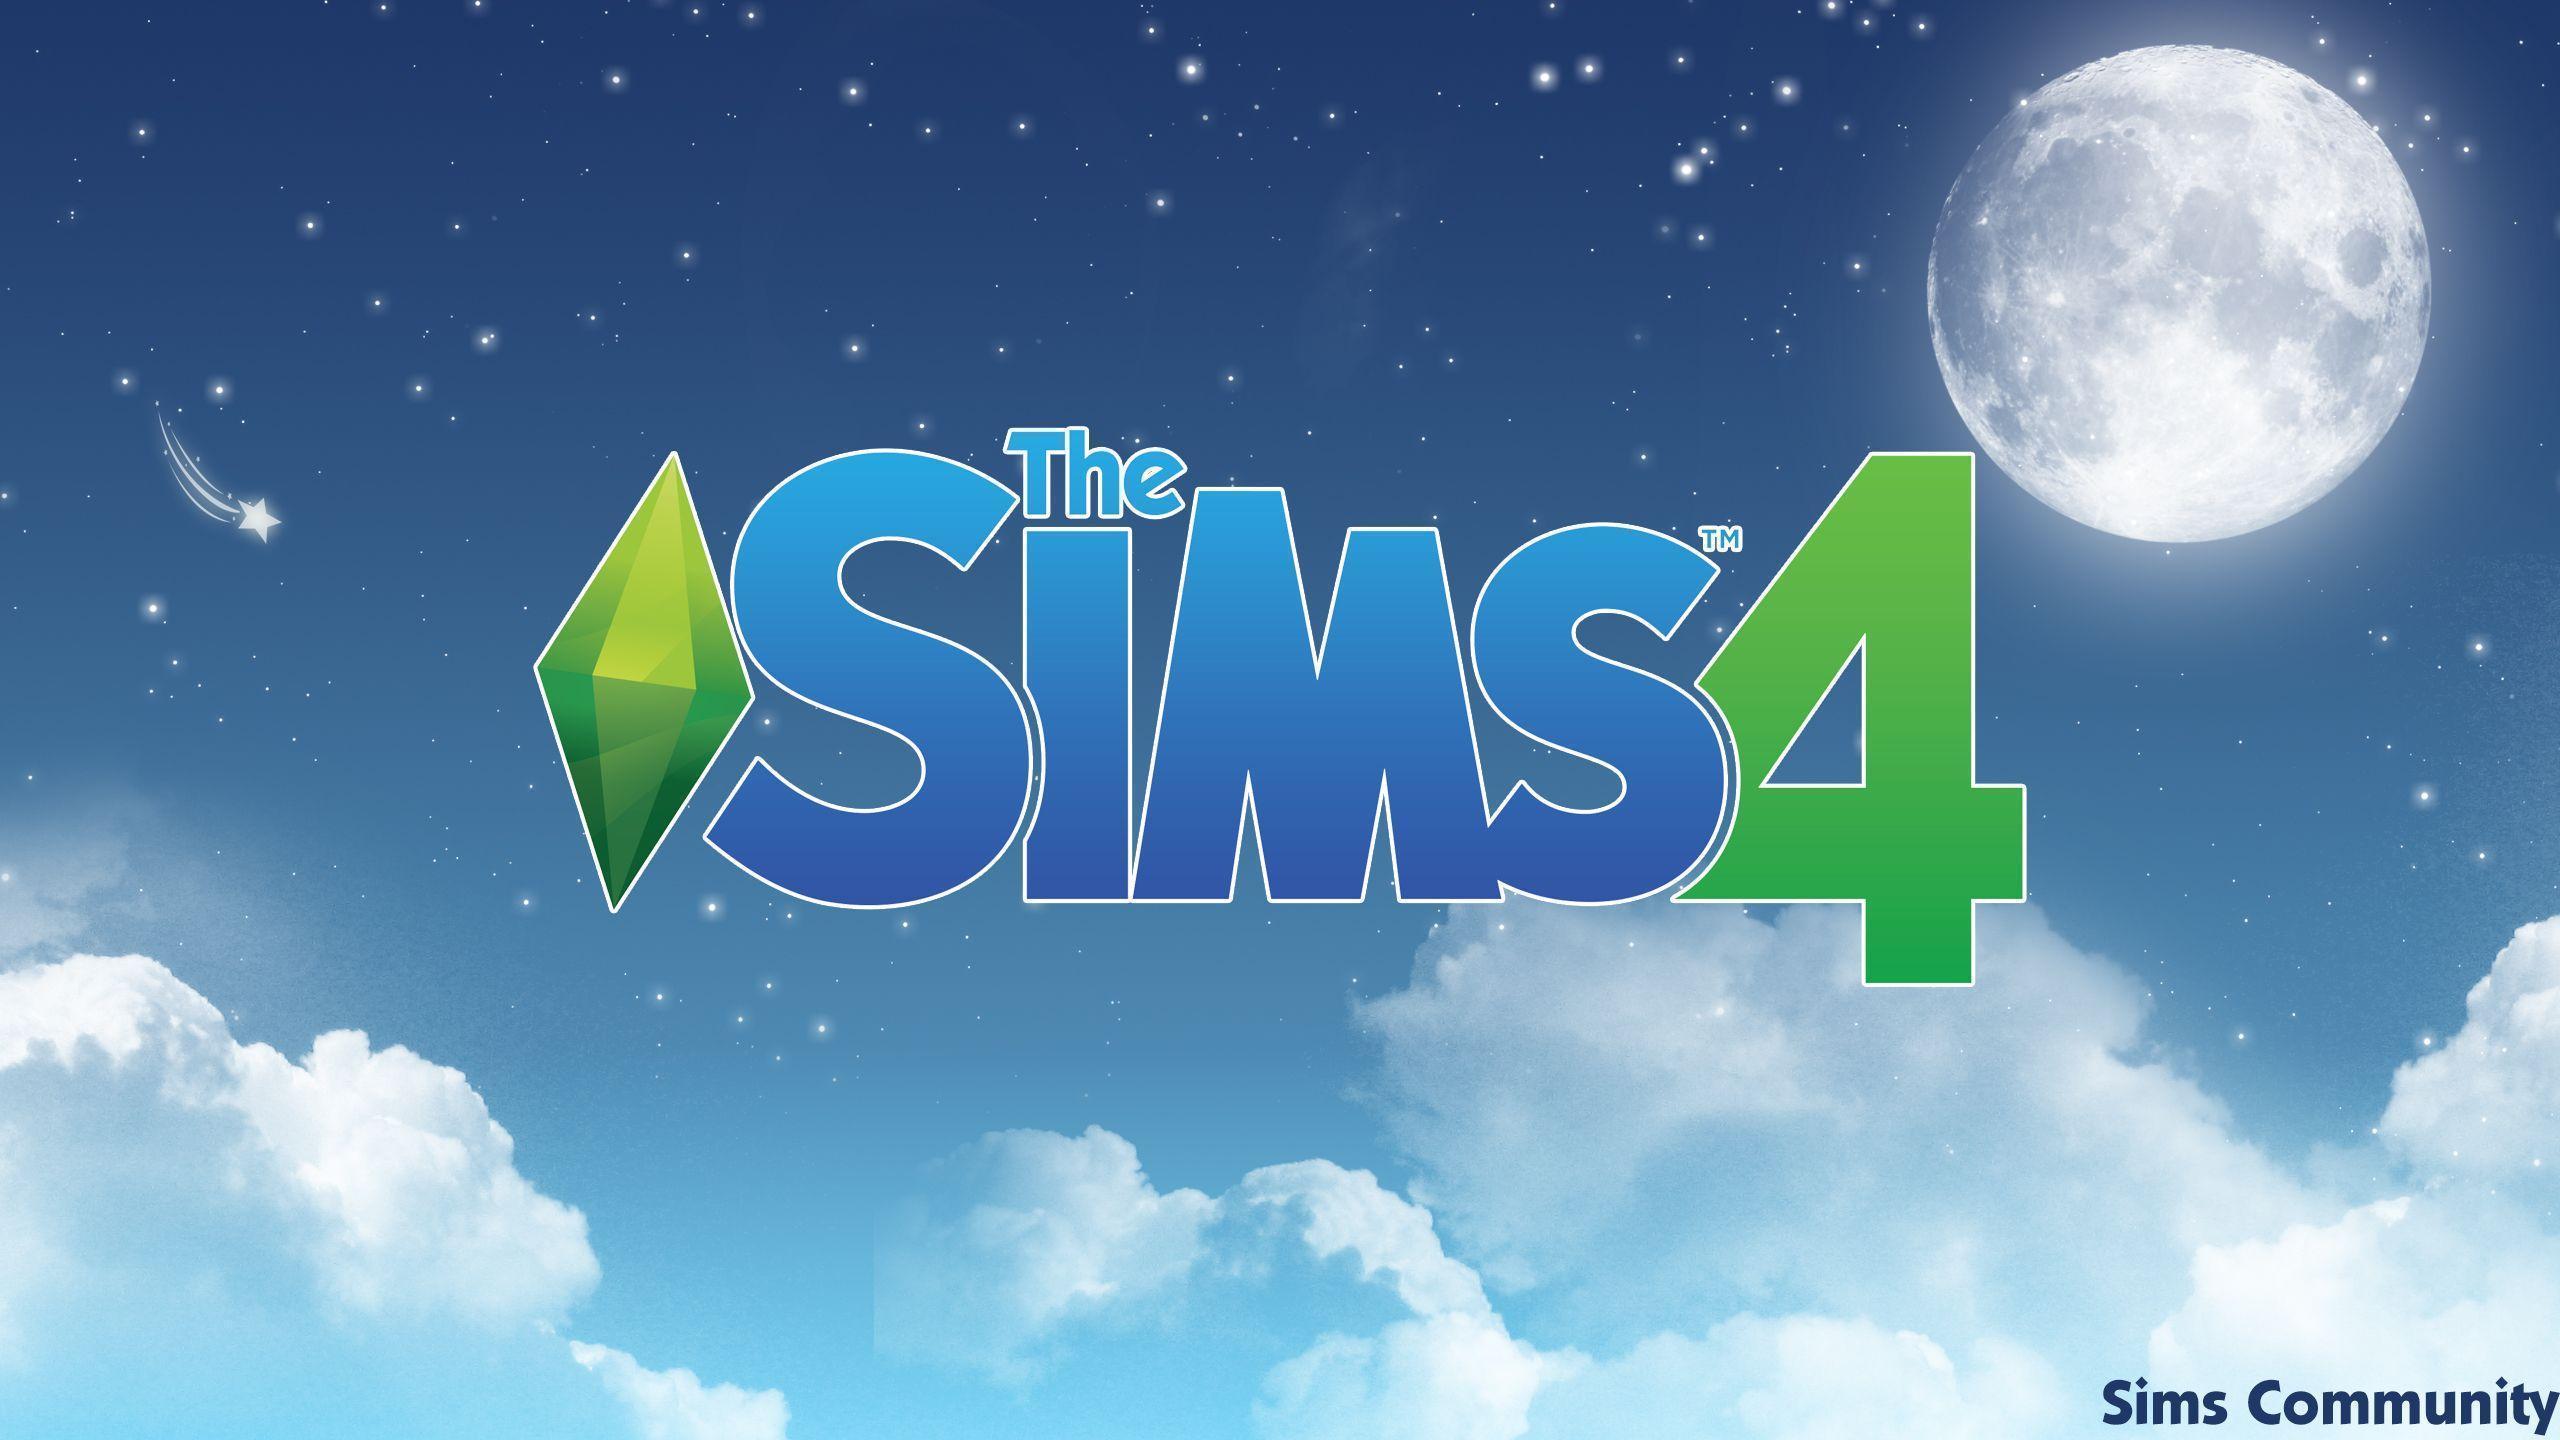 the sims 4 free pc